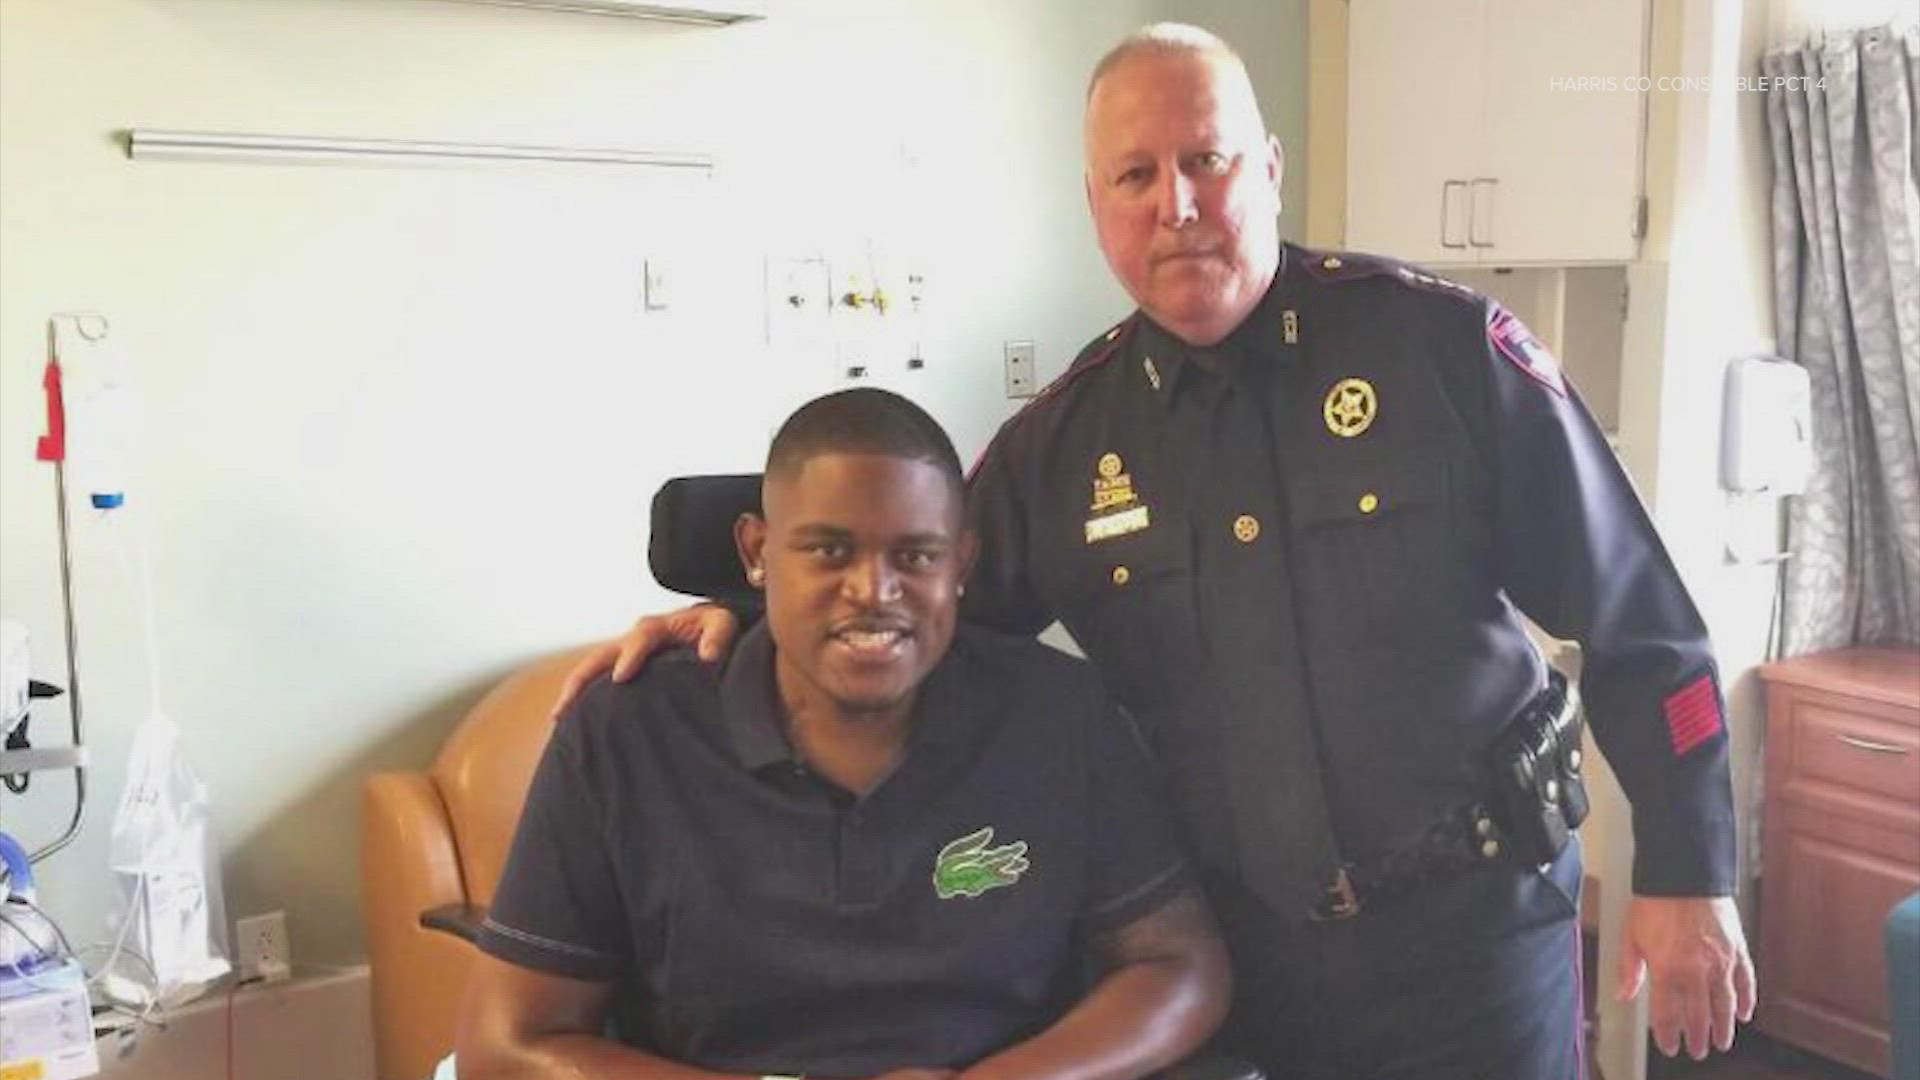 More than eight months after being shot during an ambush at a north Houston bar, Deputy Darryl Garrett was released from the hospital.